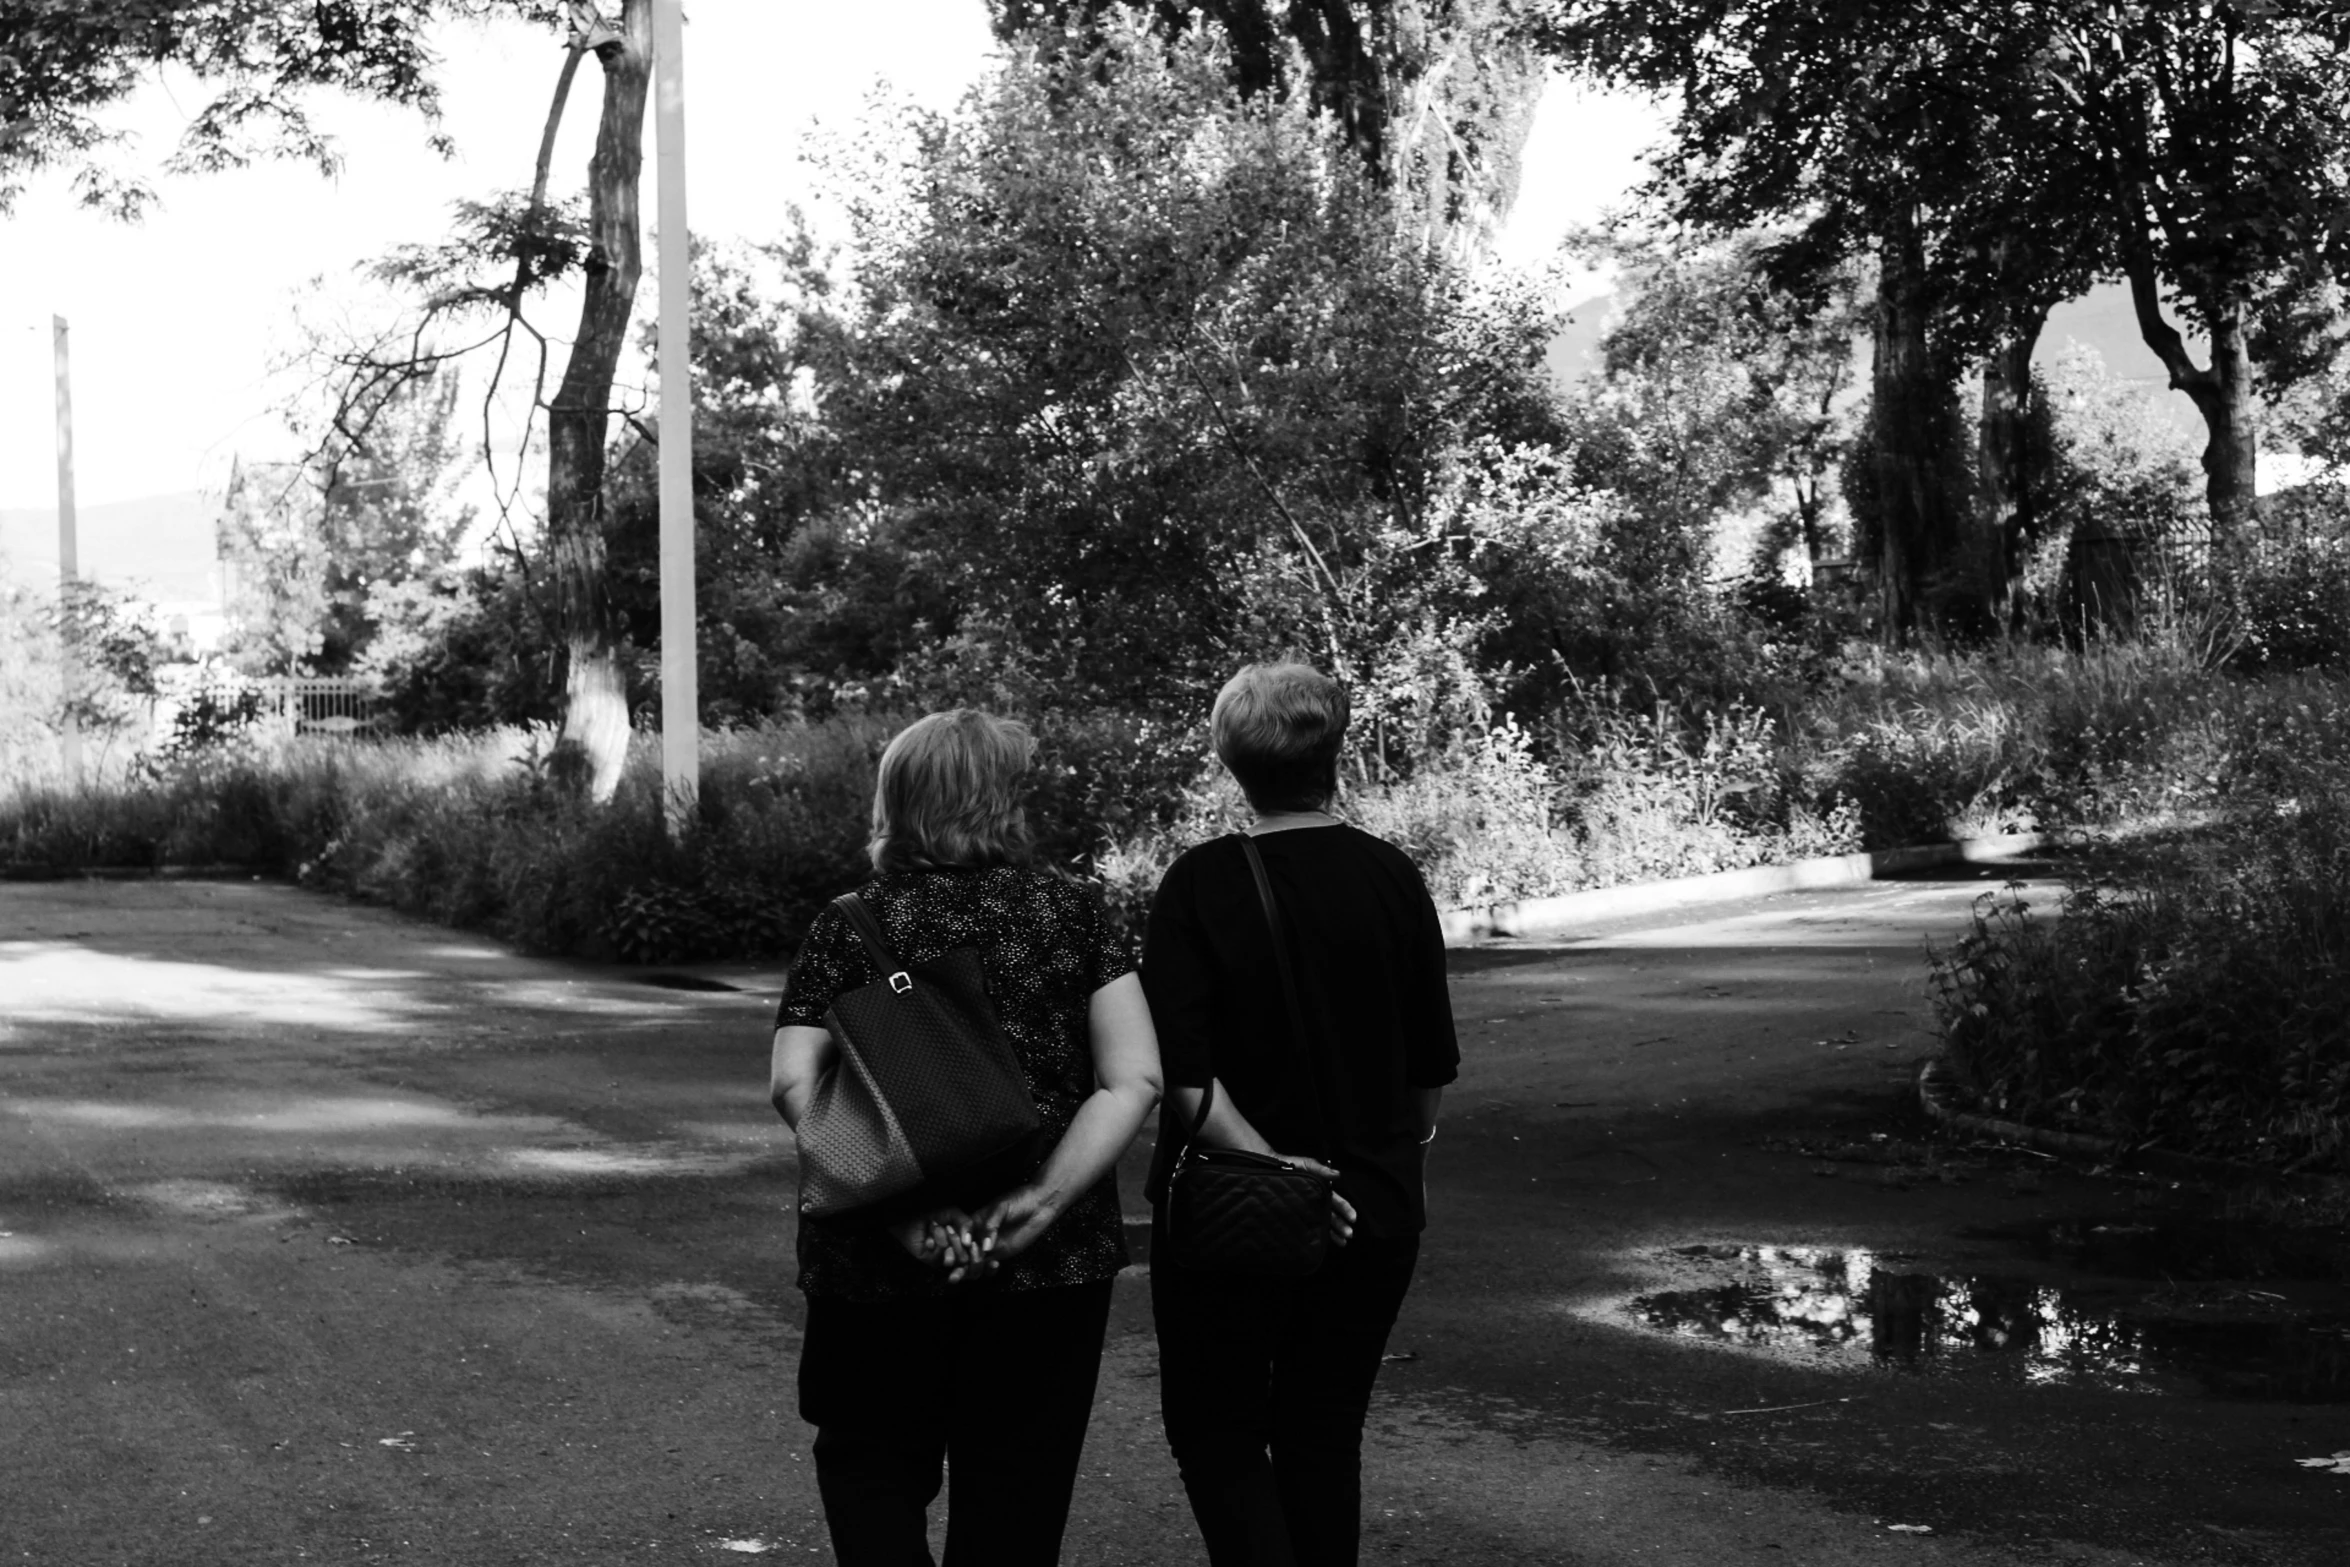 black and white image of two people walking together